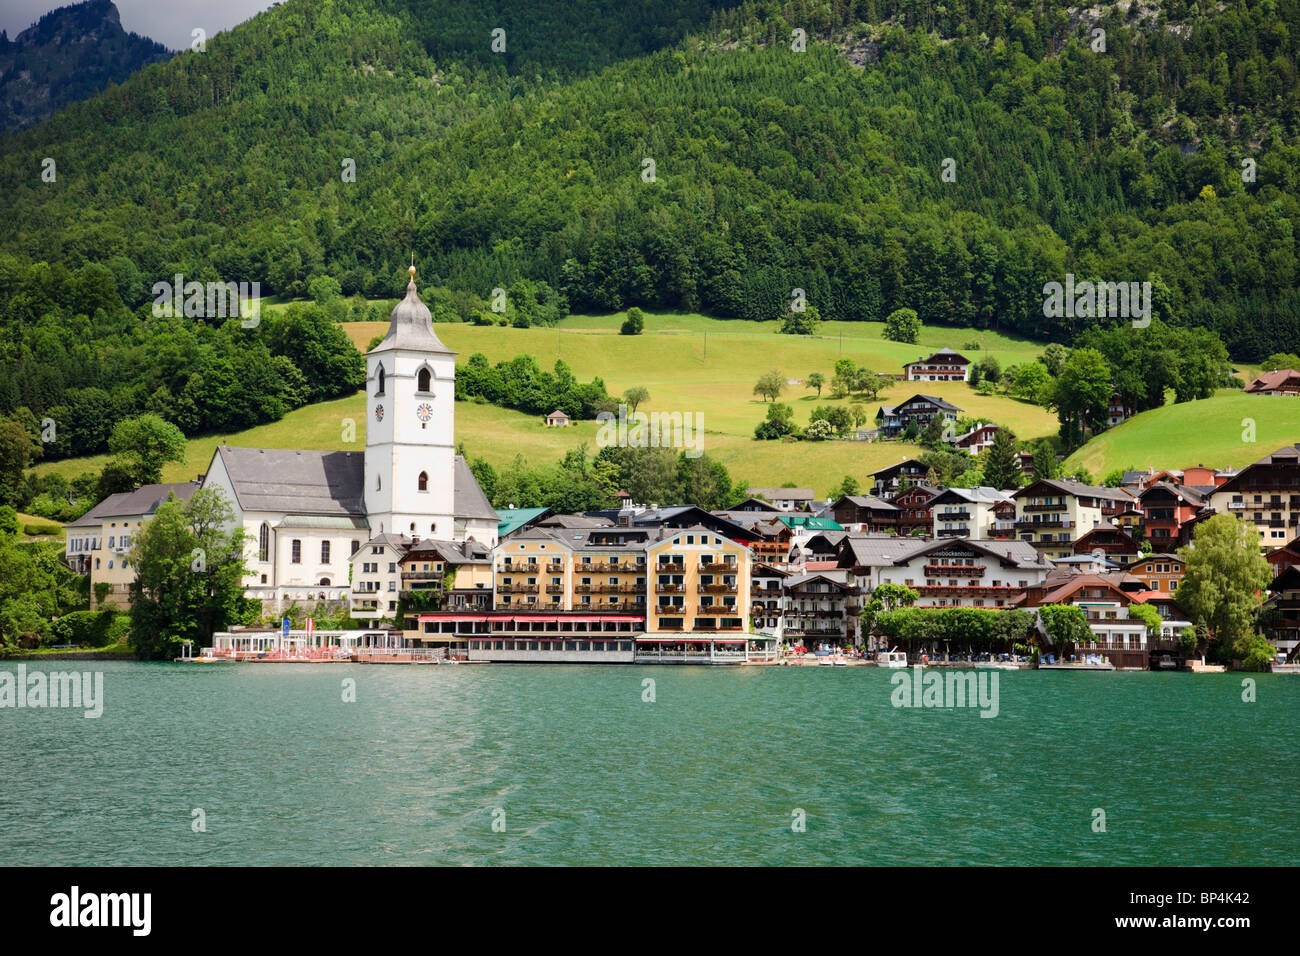 St Wolfgang, Salzkammergut, Upper Austria, Austria, Europe. View of town waterfront buildings and church from Wolfgangsee lake Stock Photo